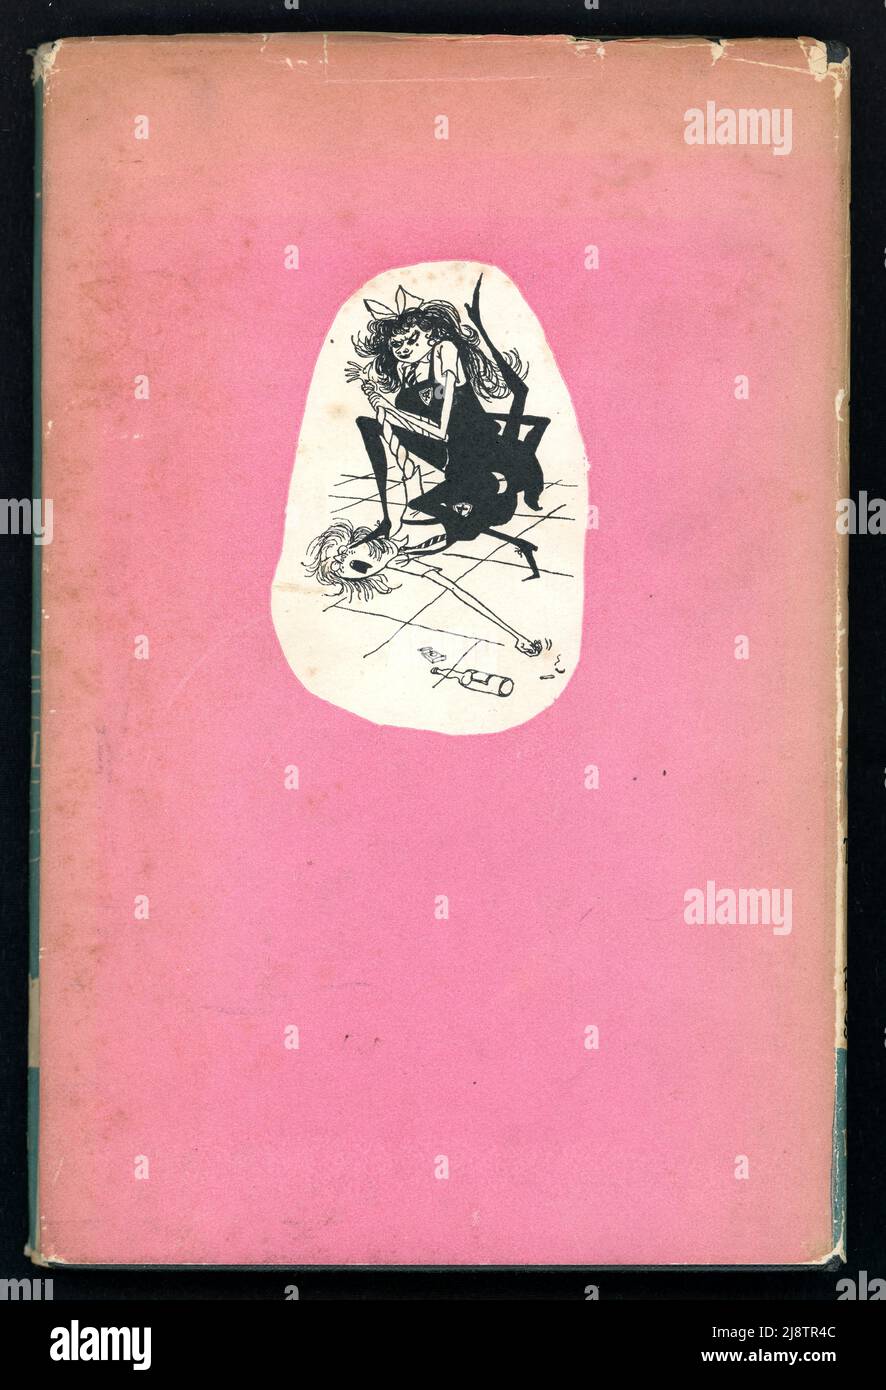 Reverse of a copy of the illustrated dustjacket of the book 'The Terror of St Trinian's' - illustration by Ronald Searle, (who was also the creator of  St. Trinian's School) written by Timothy Shy (pen name for D. B. Wyndham Lewis),1952 Stock Photo